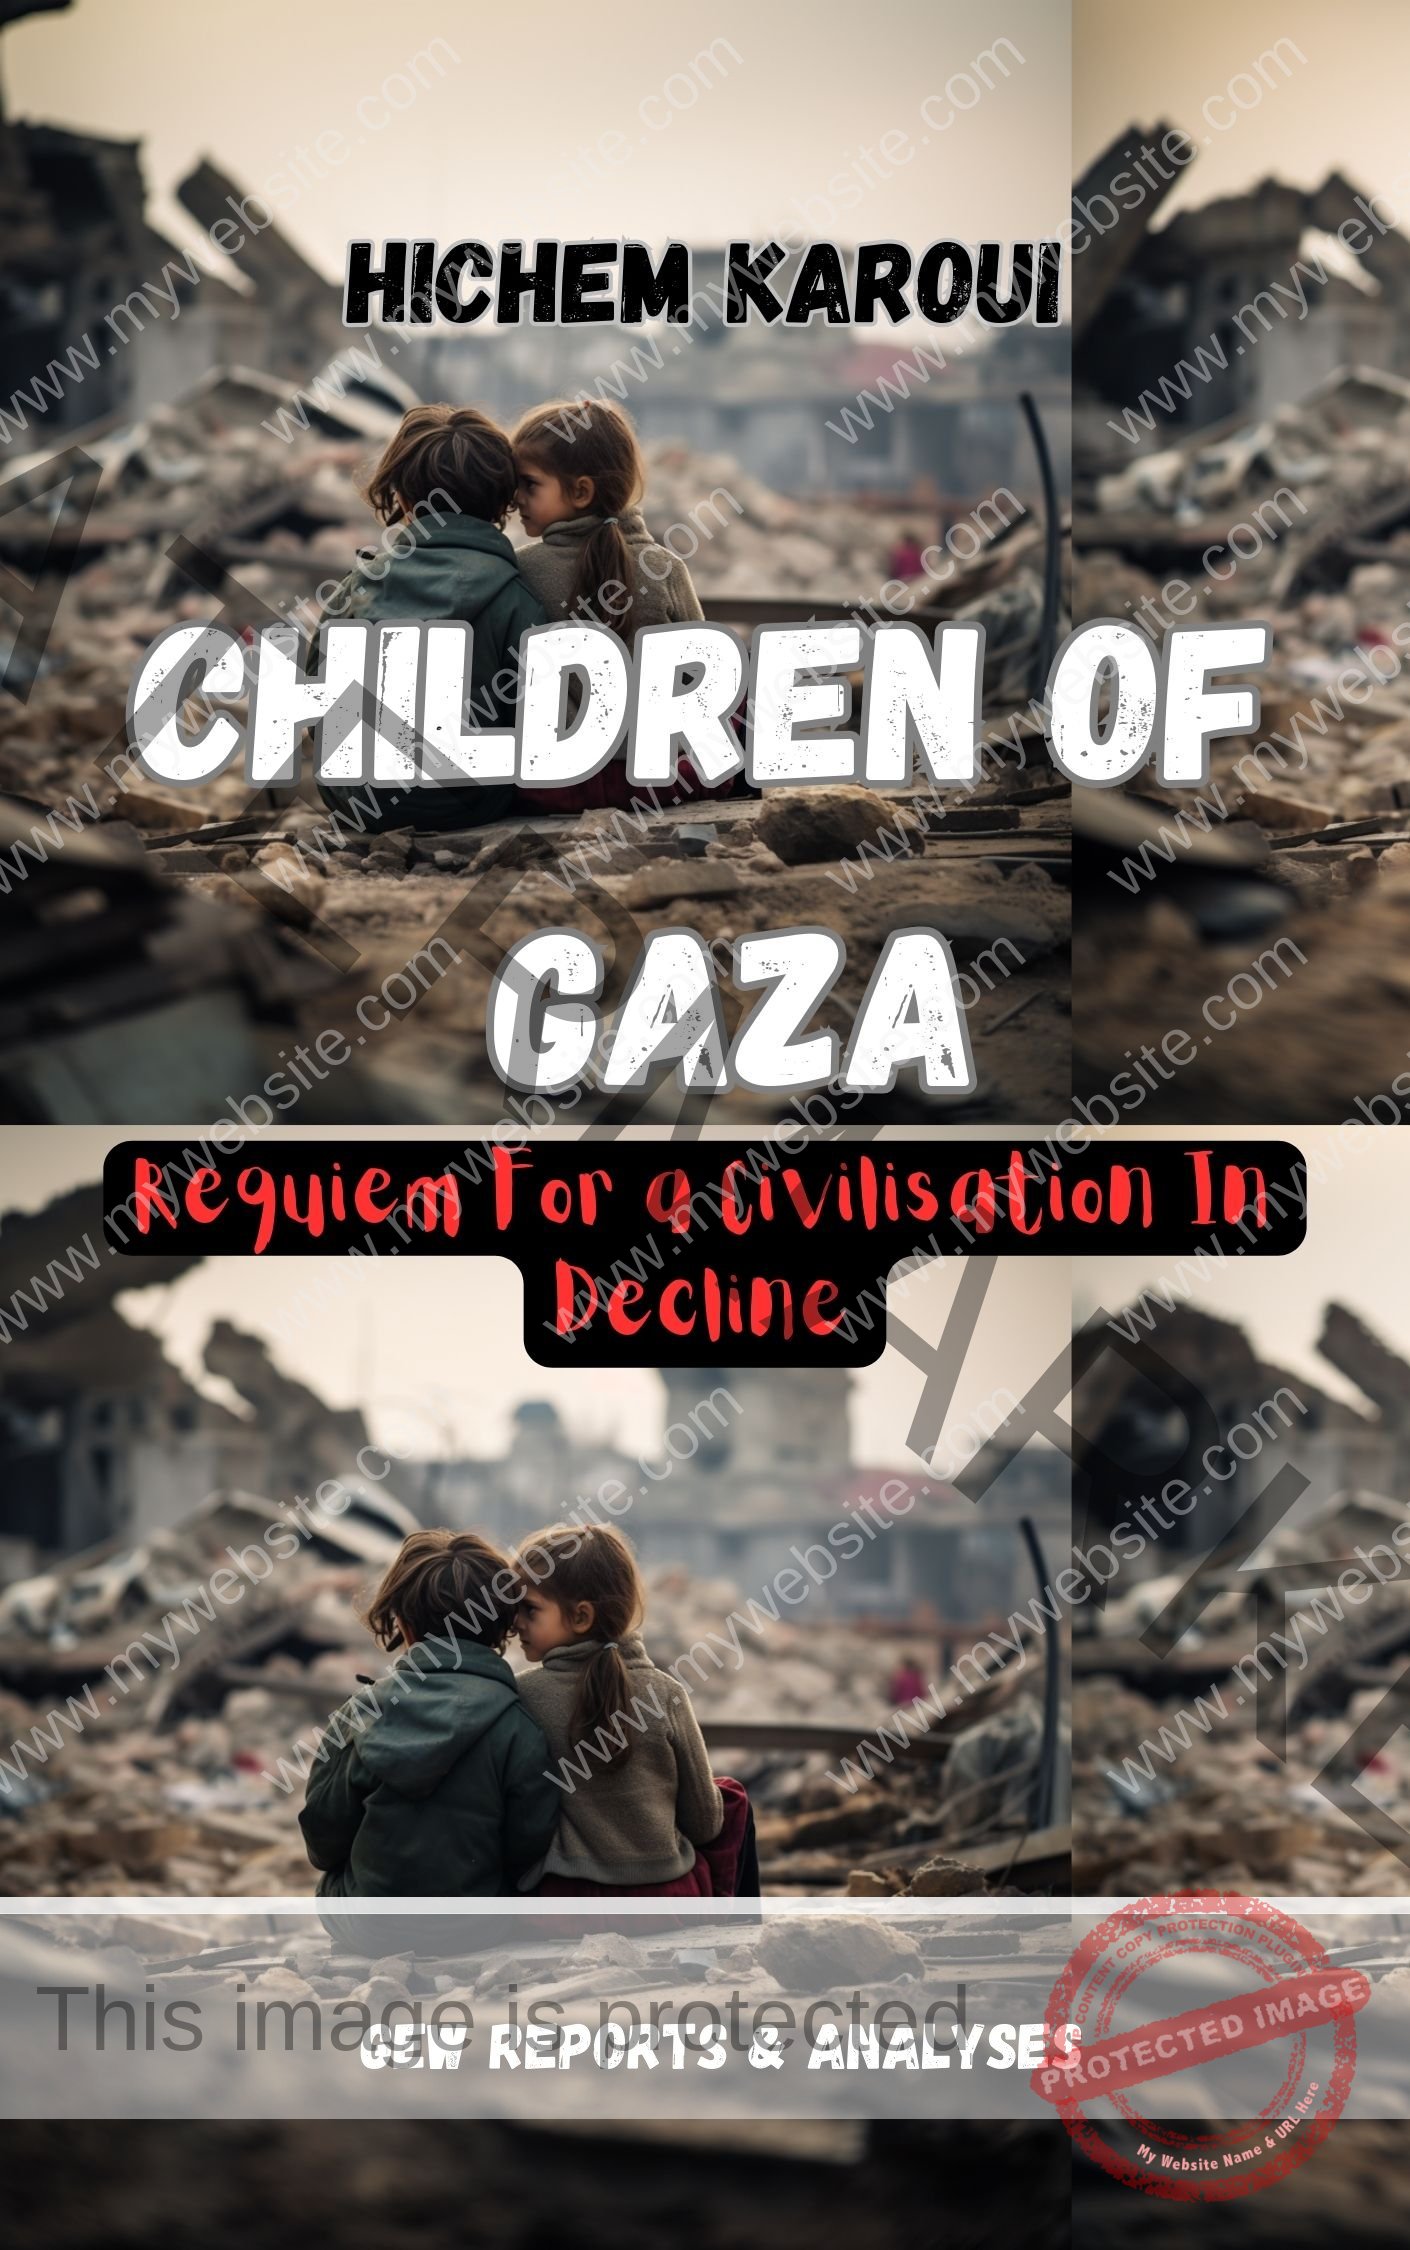 Extracts From: Children of Gaza: Requiem For a Civilisation In Decline